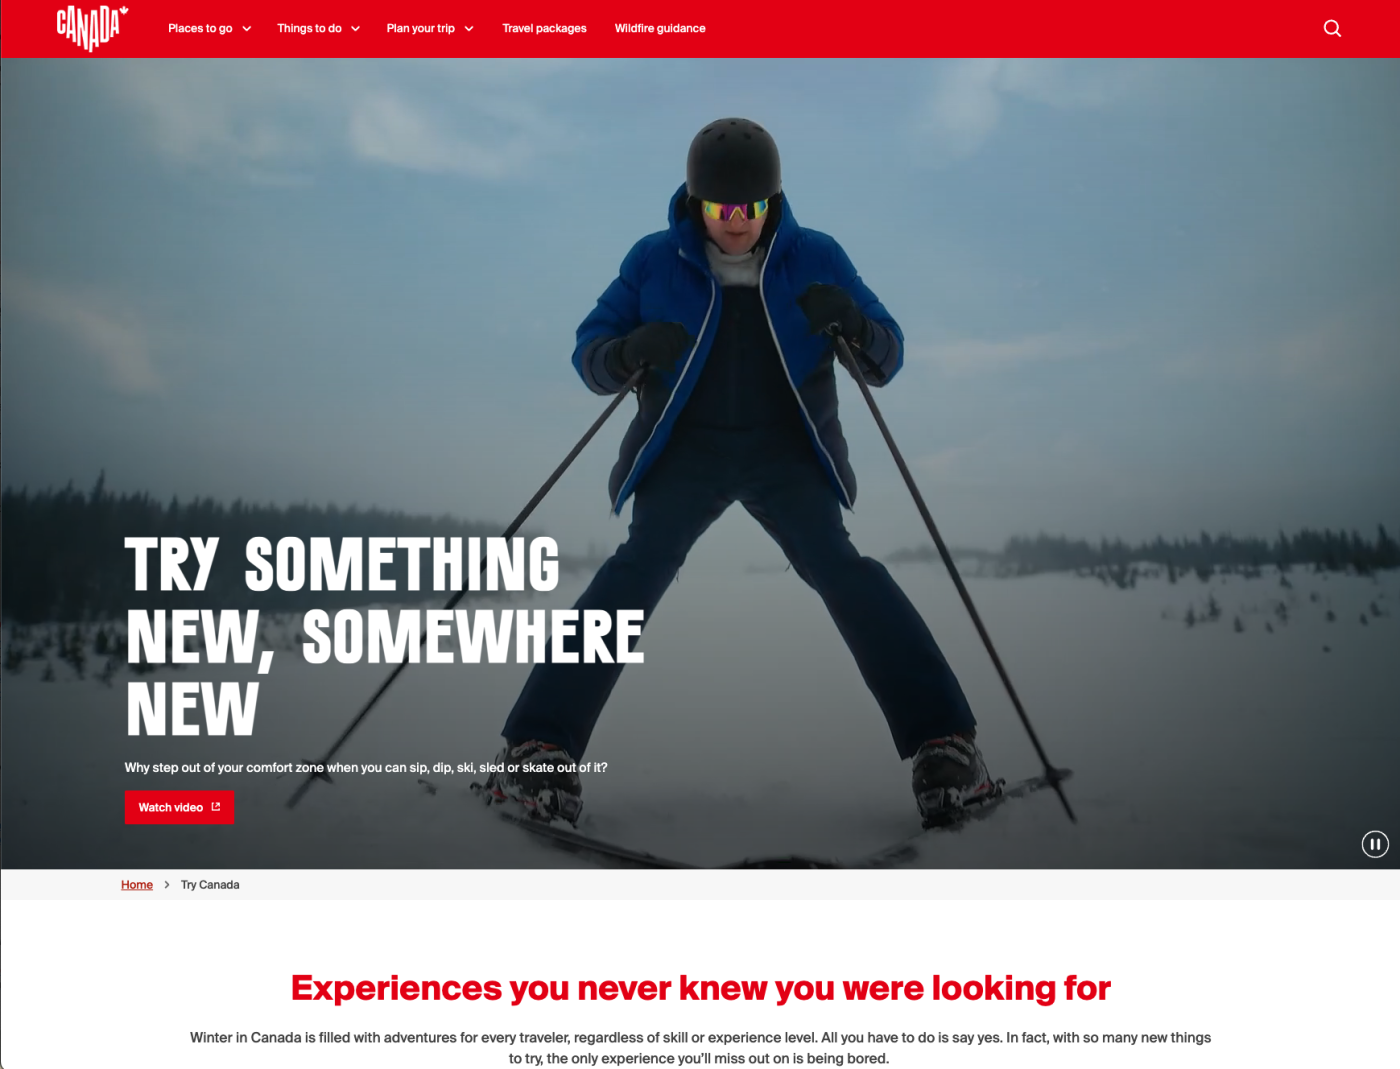 A screenshot of the Try Canada website landing page